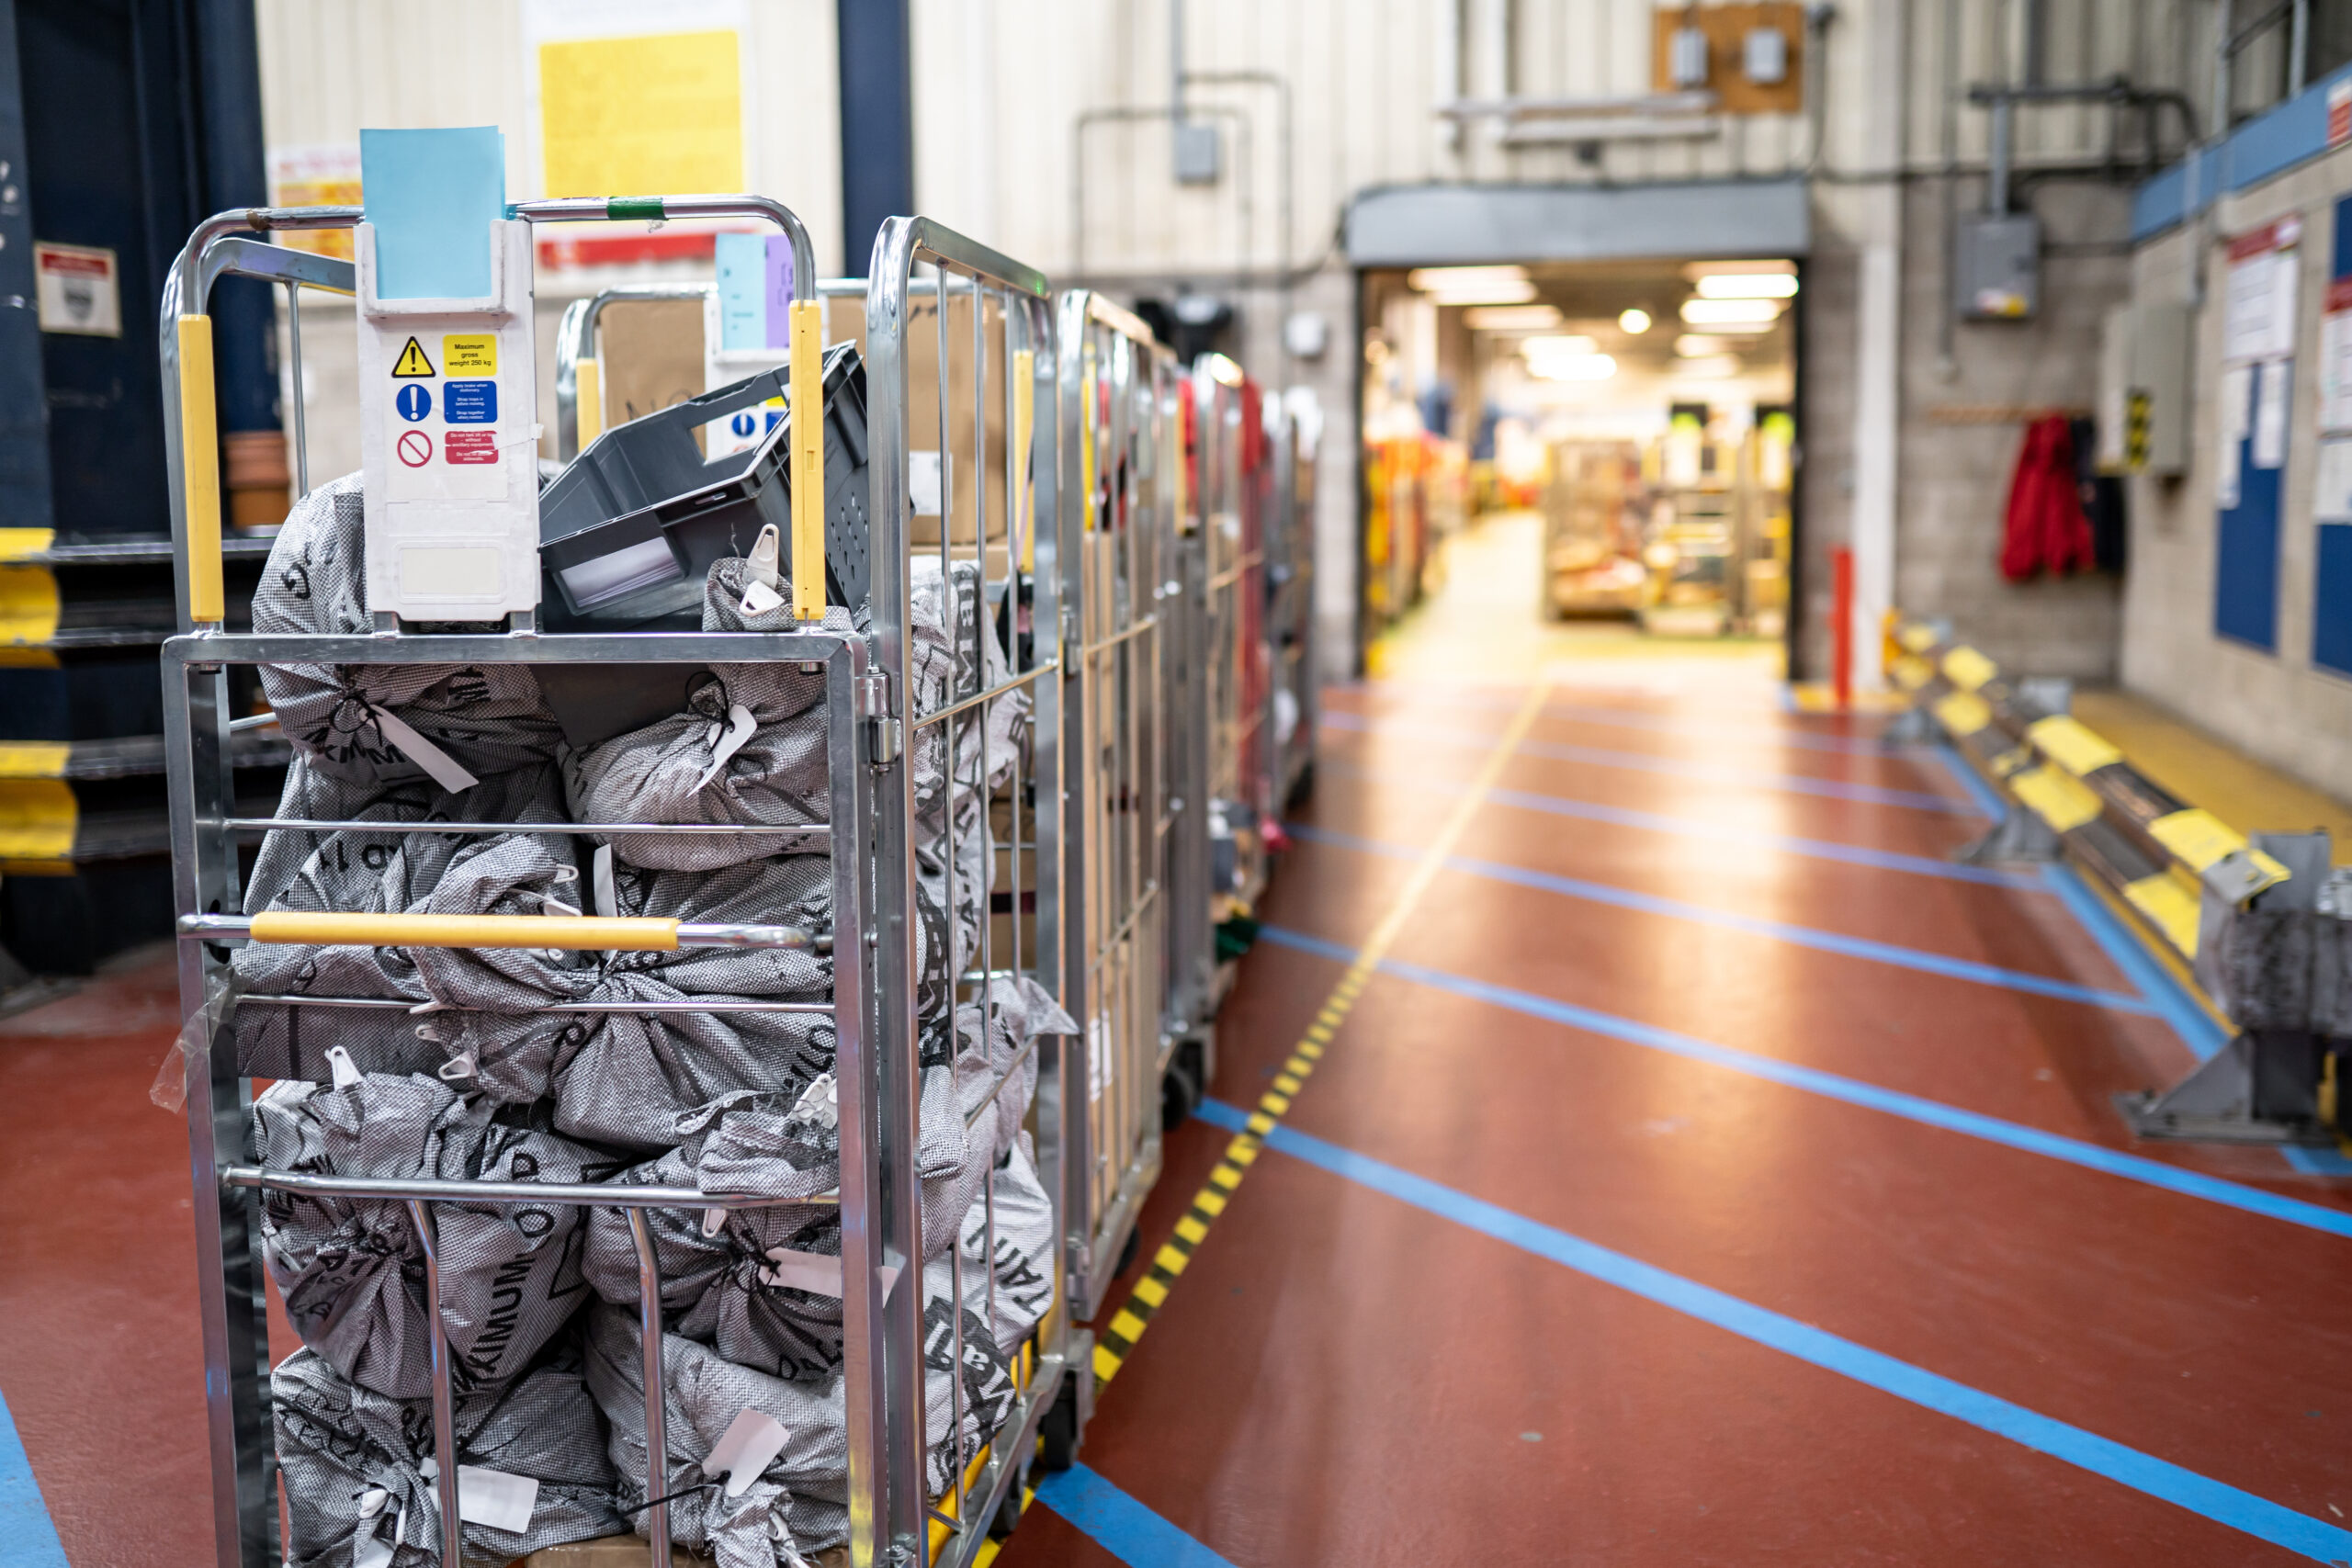 Royal Mail installs latest sorting machine in Birmingham to meet ongoing parcel demand